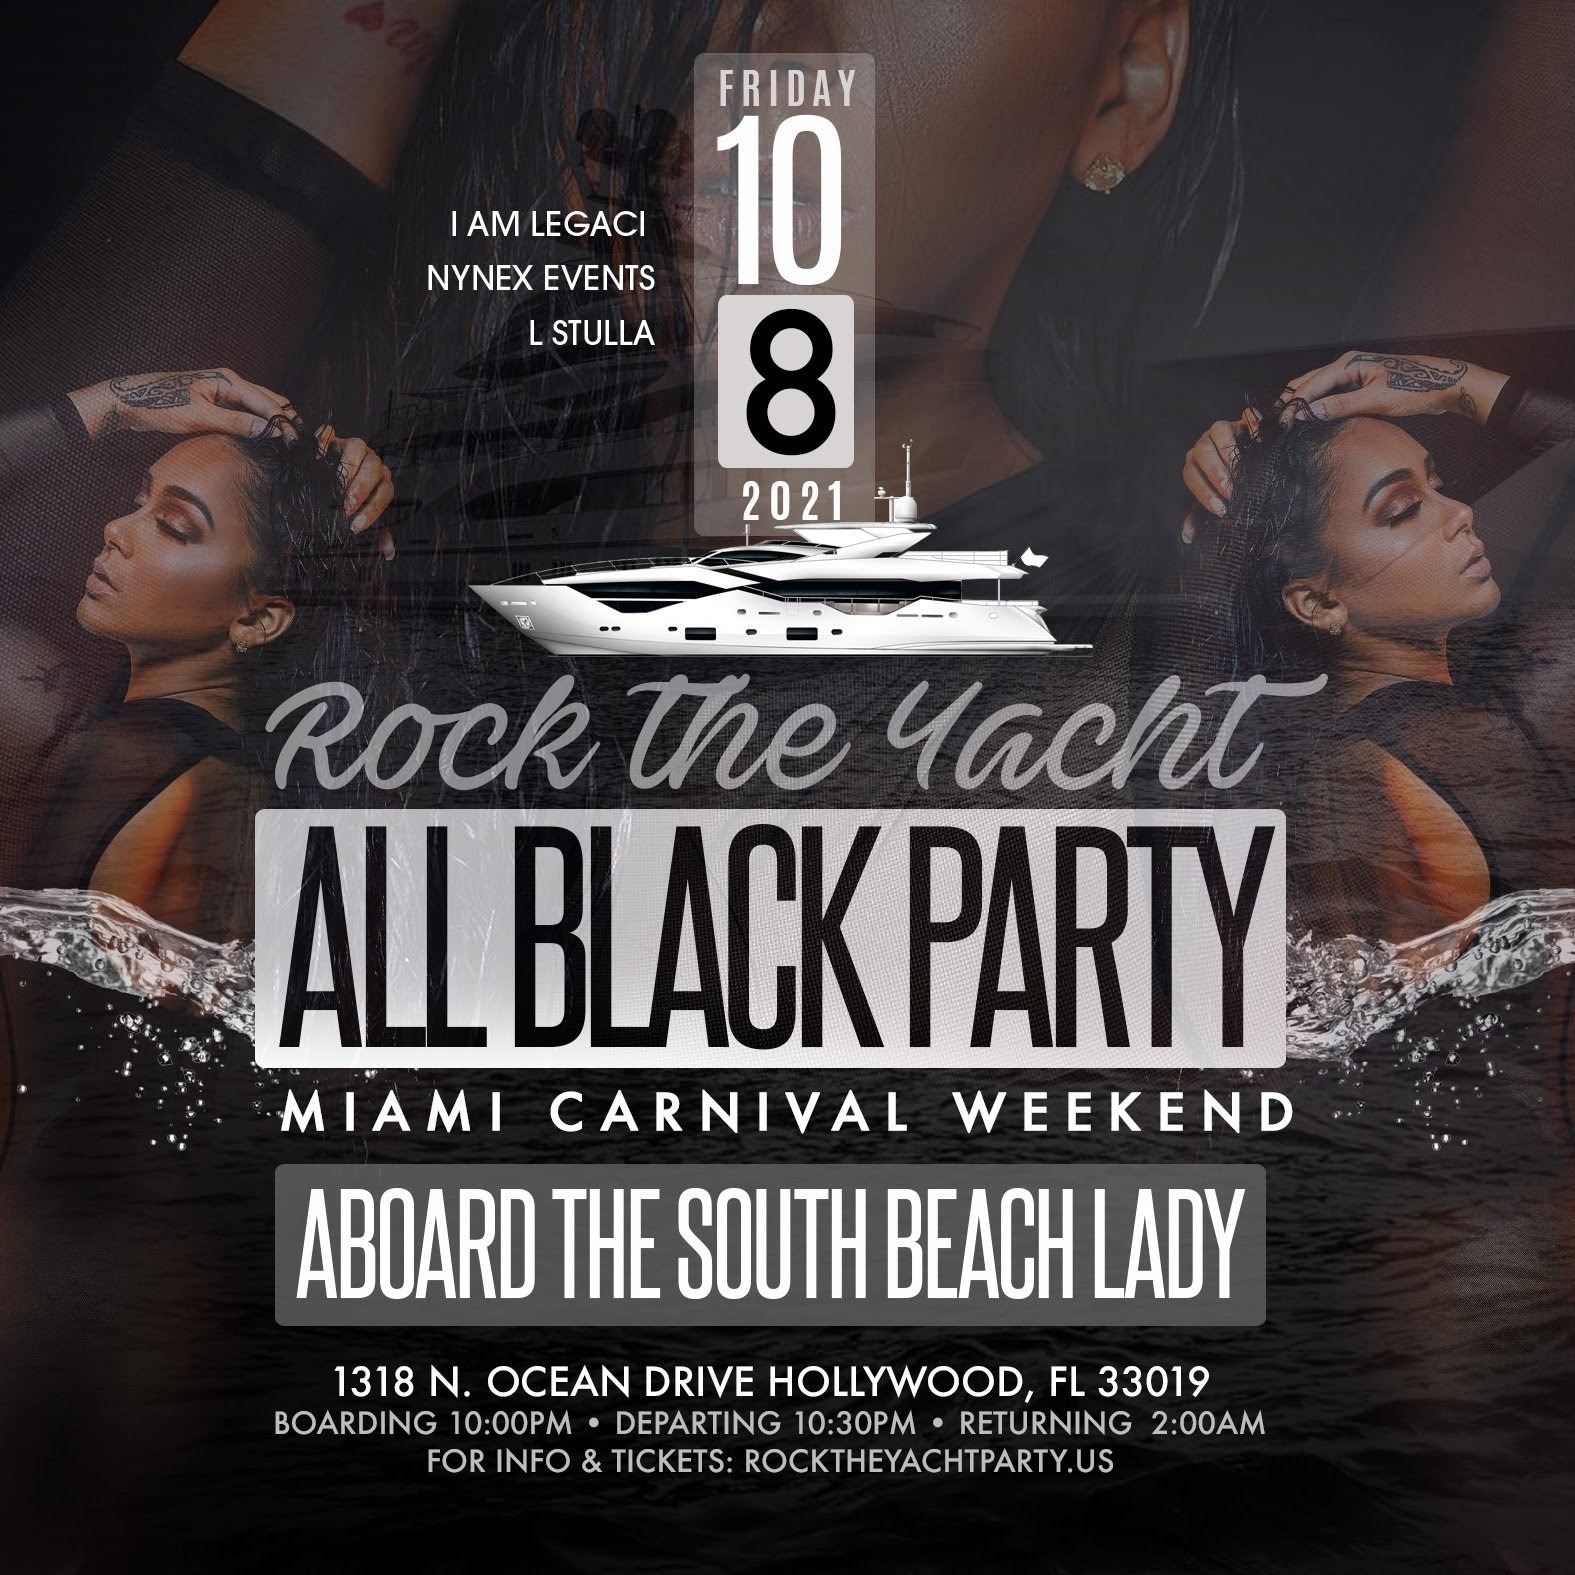 ROCK THE YACHT 2021 ALL BLACK YACHT PARTY MIAMI CARNIVAL COLUMBUS DAY WEEKEND